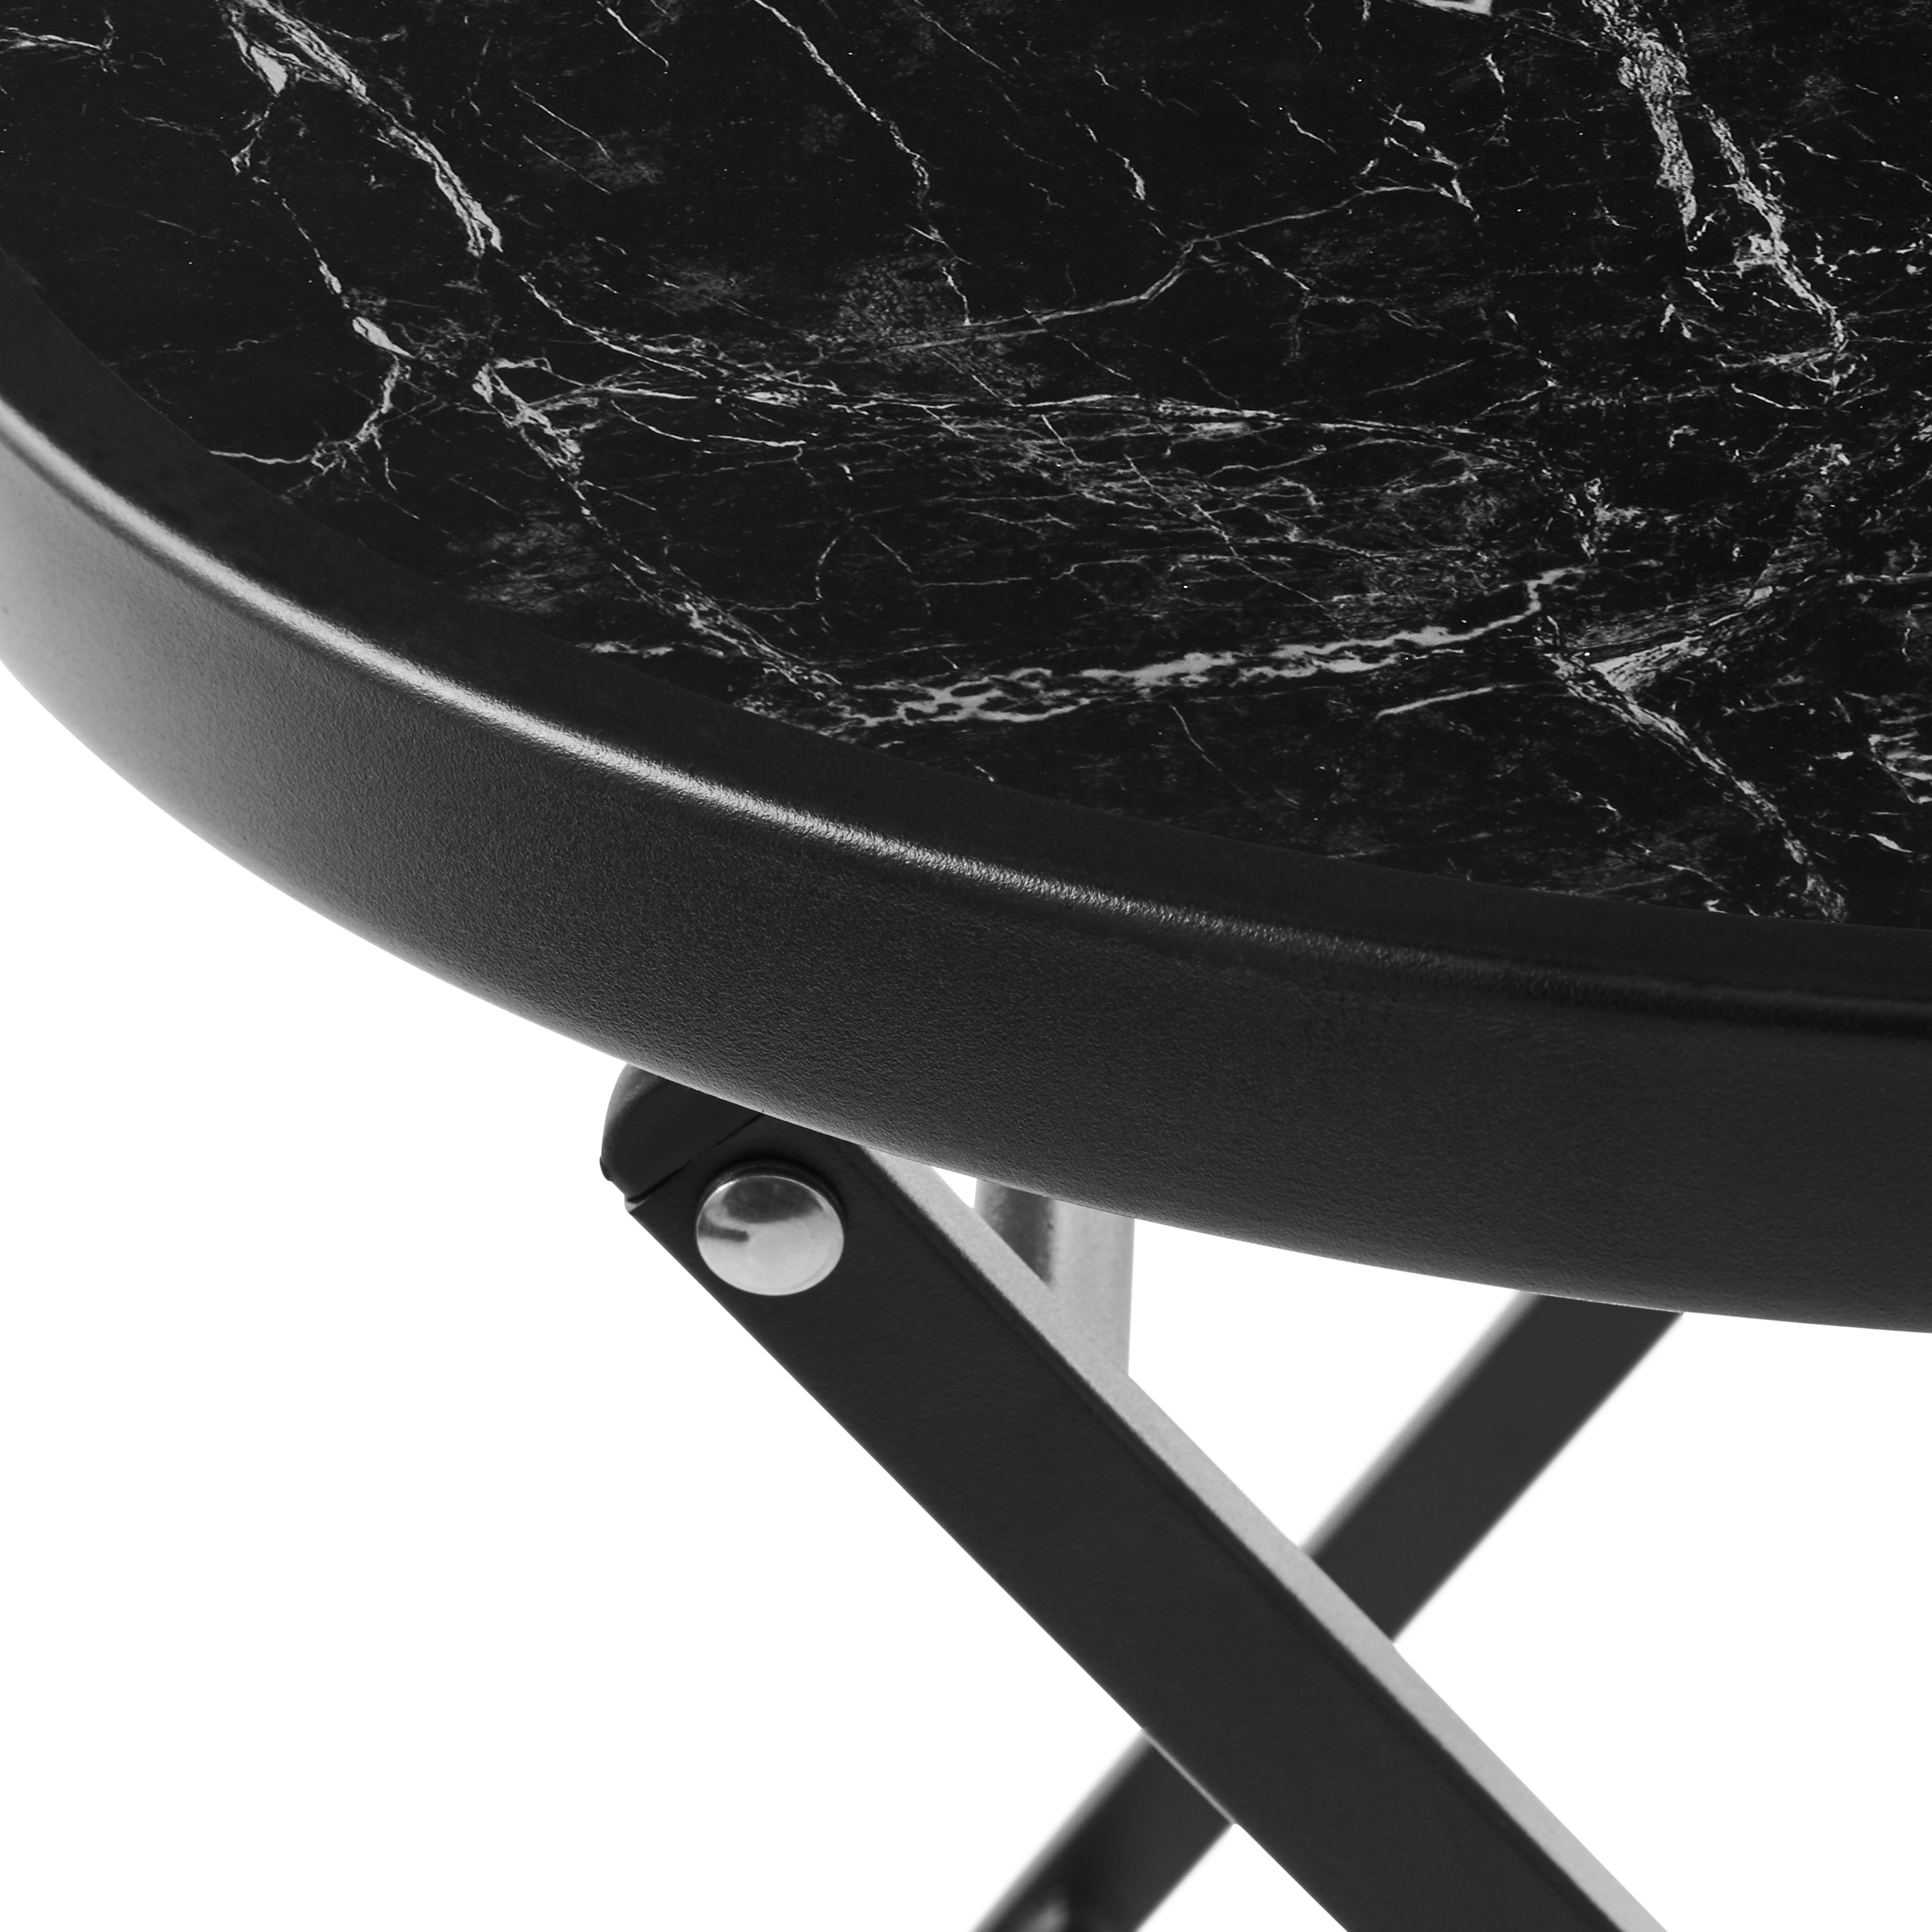 Mainstays 18" Greyson Square Black Marble Steel Round Folding Table - image 2 of 6